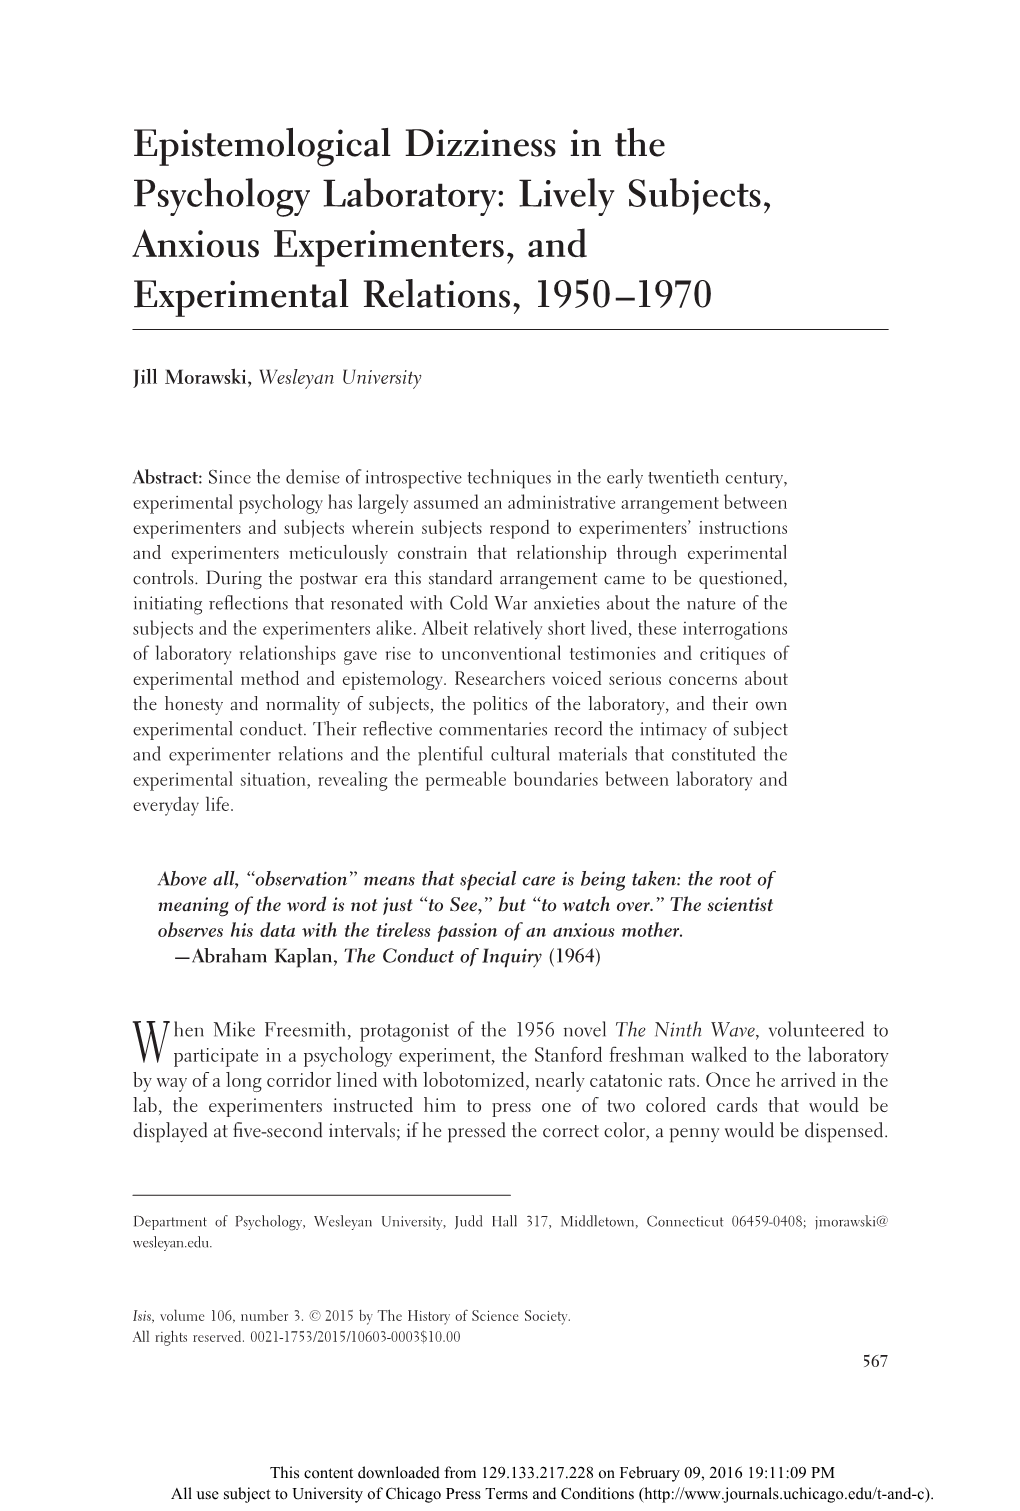 Epistemological Dizziness in the Psychology Laboratory: Lively Subjects, Anxious Experimenters, and Experimental Relations, 1950–1970